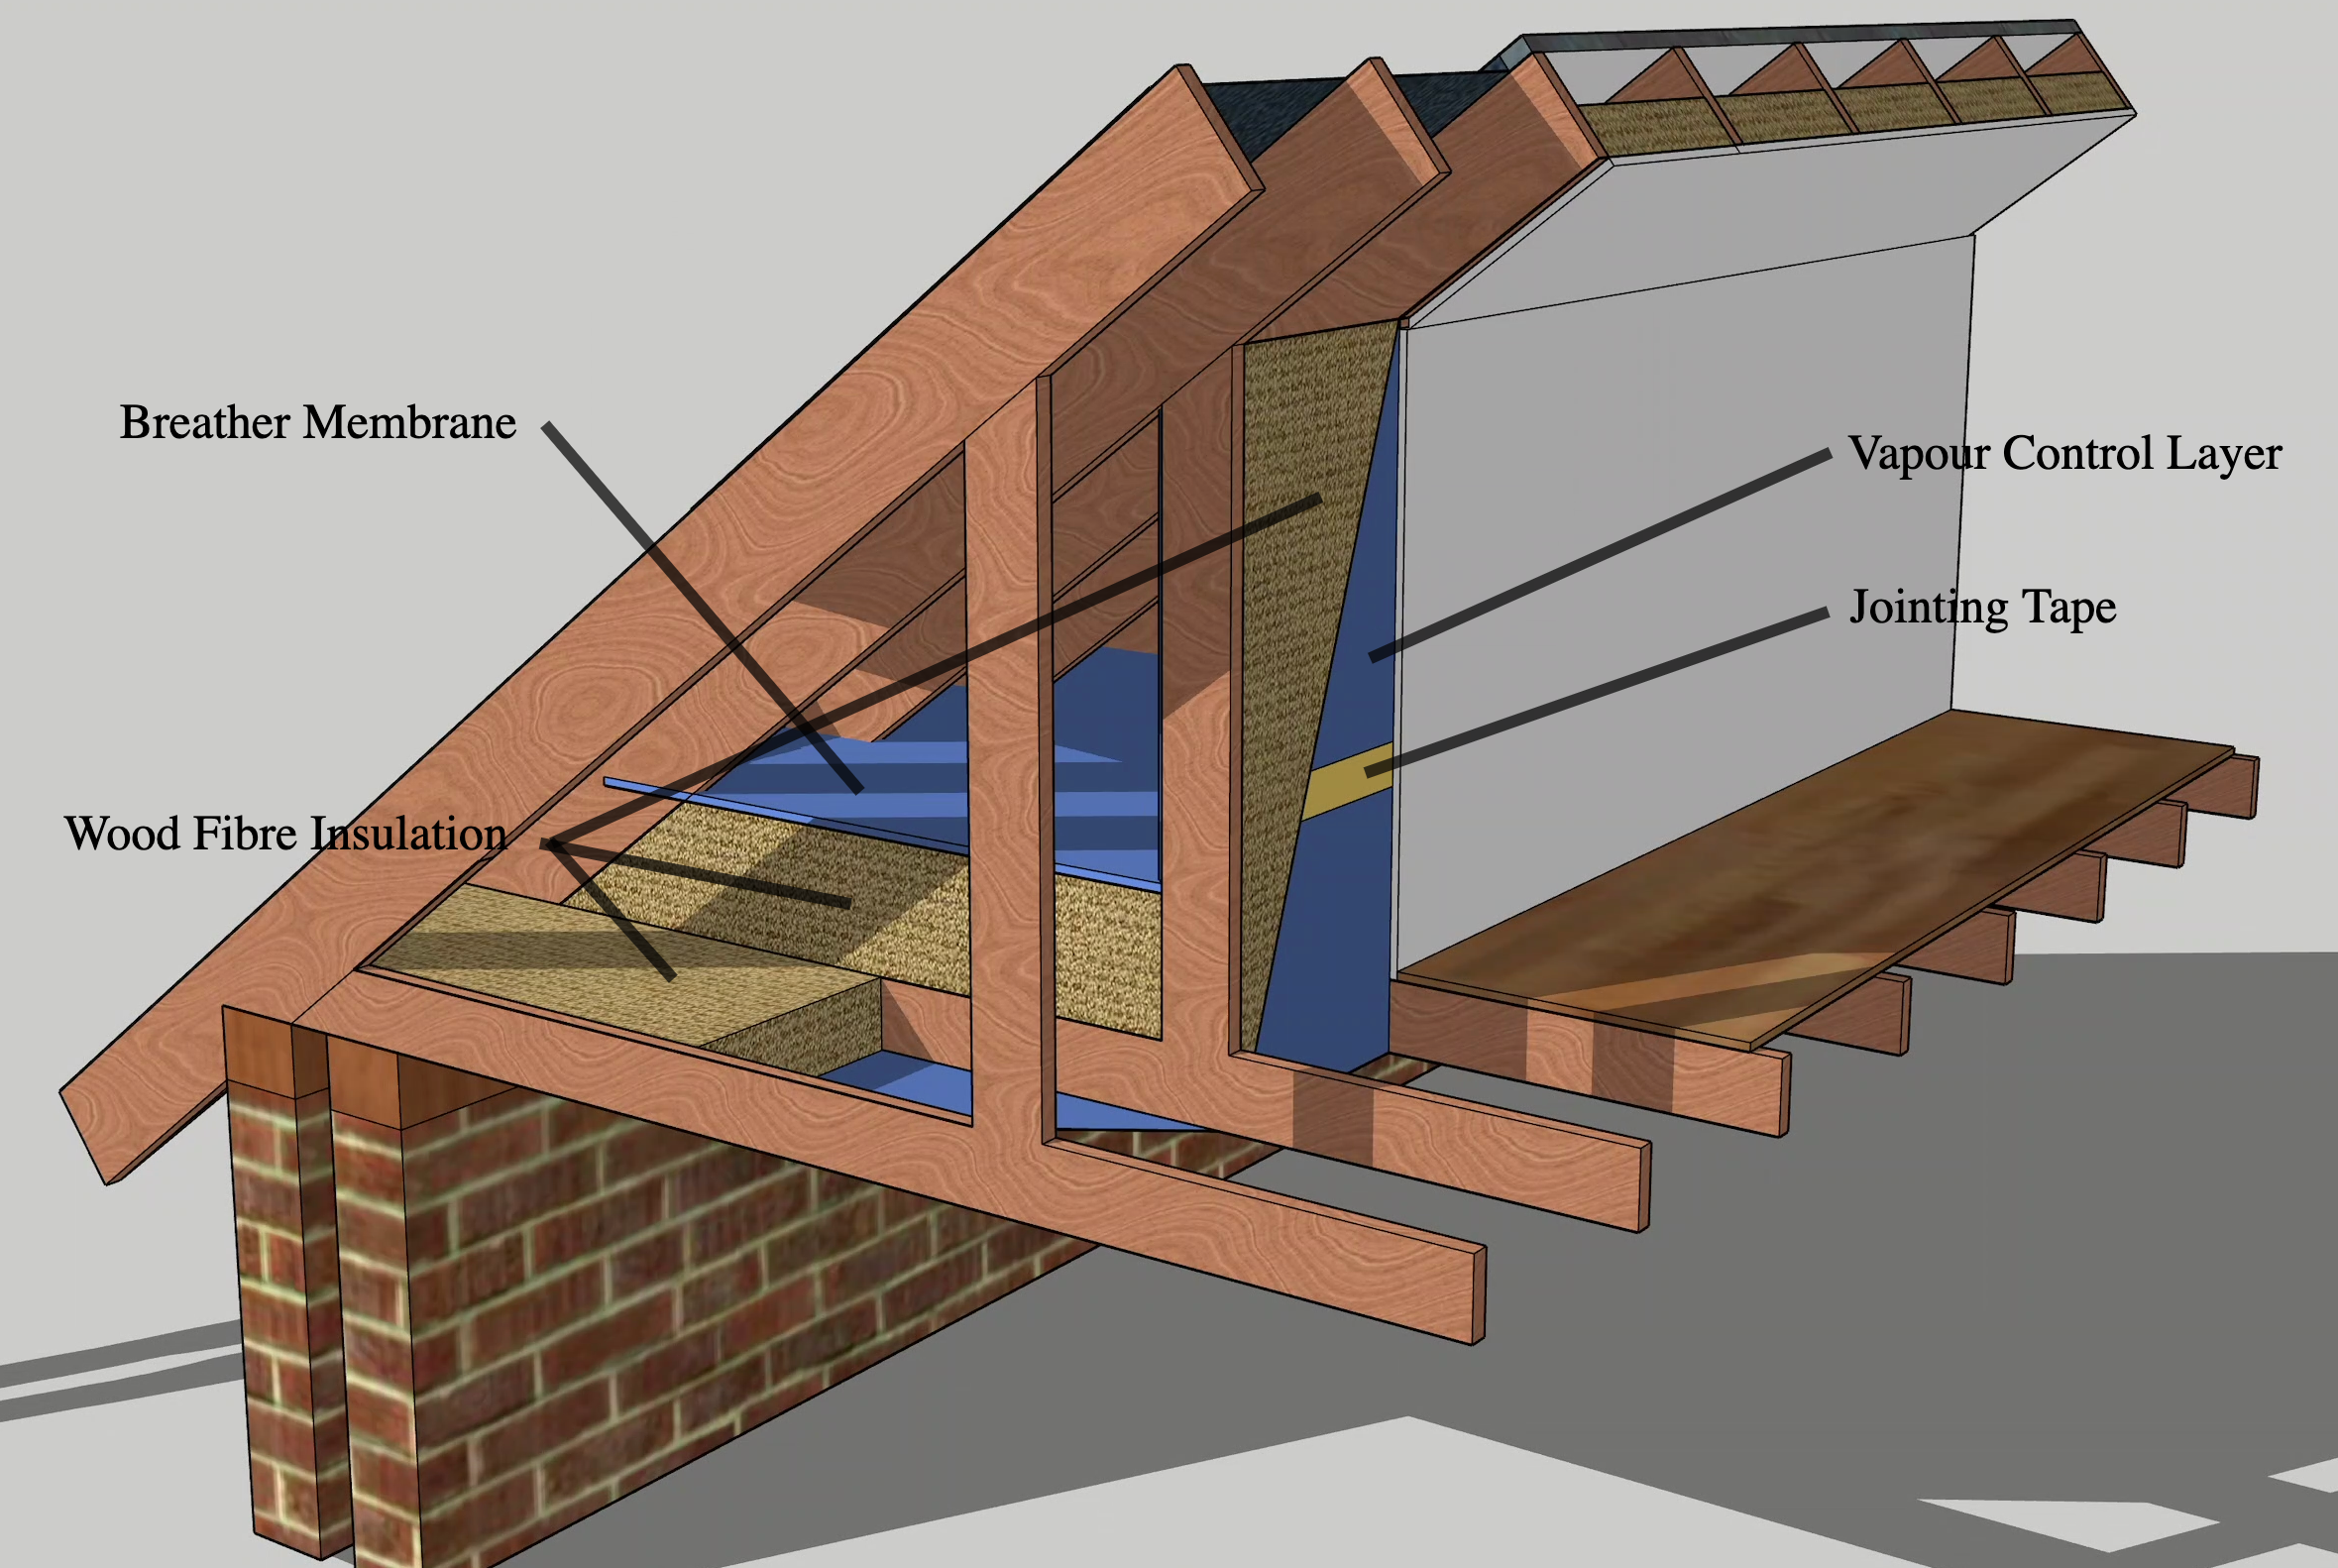 https://www.eco-home-essentials.co.uk/images/Warmroof_insulation.png